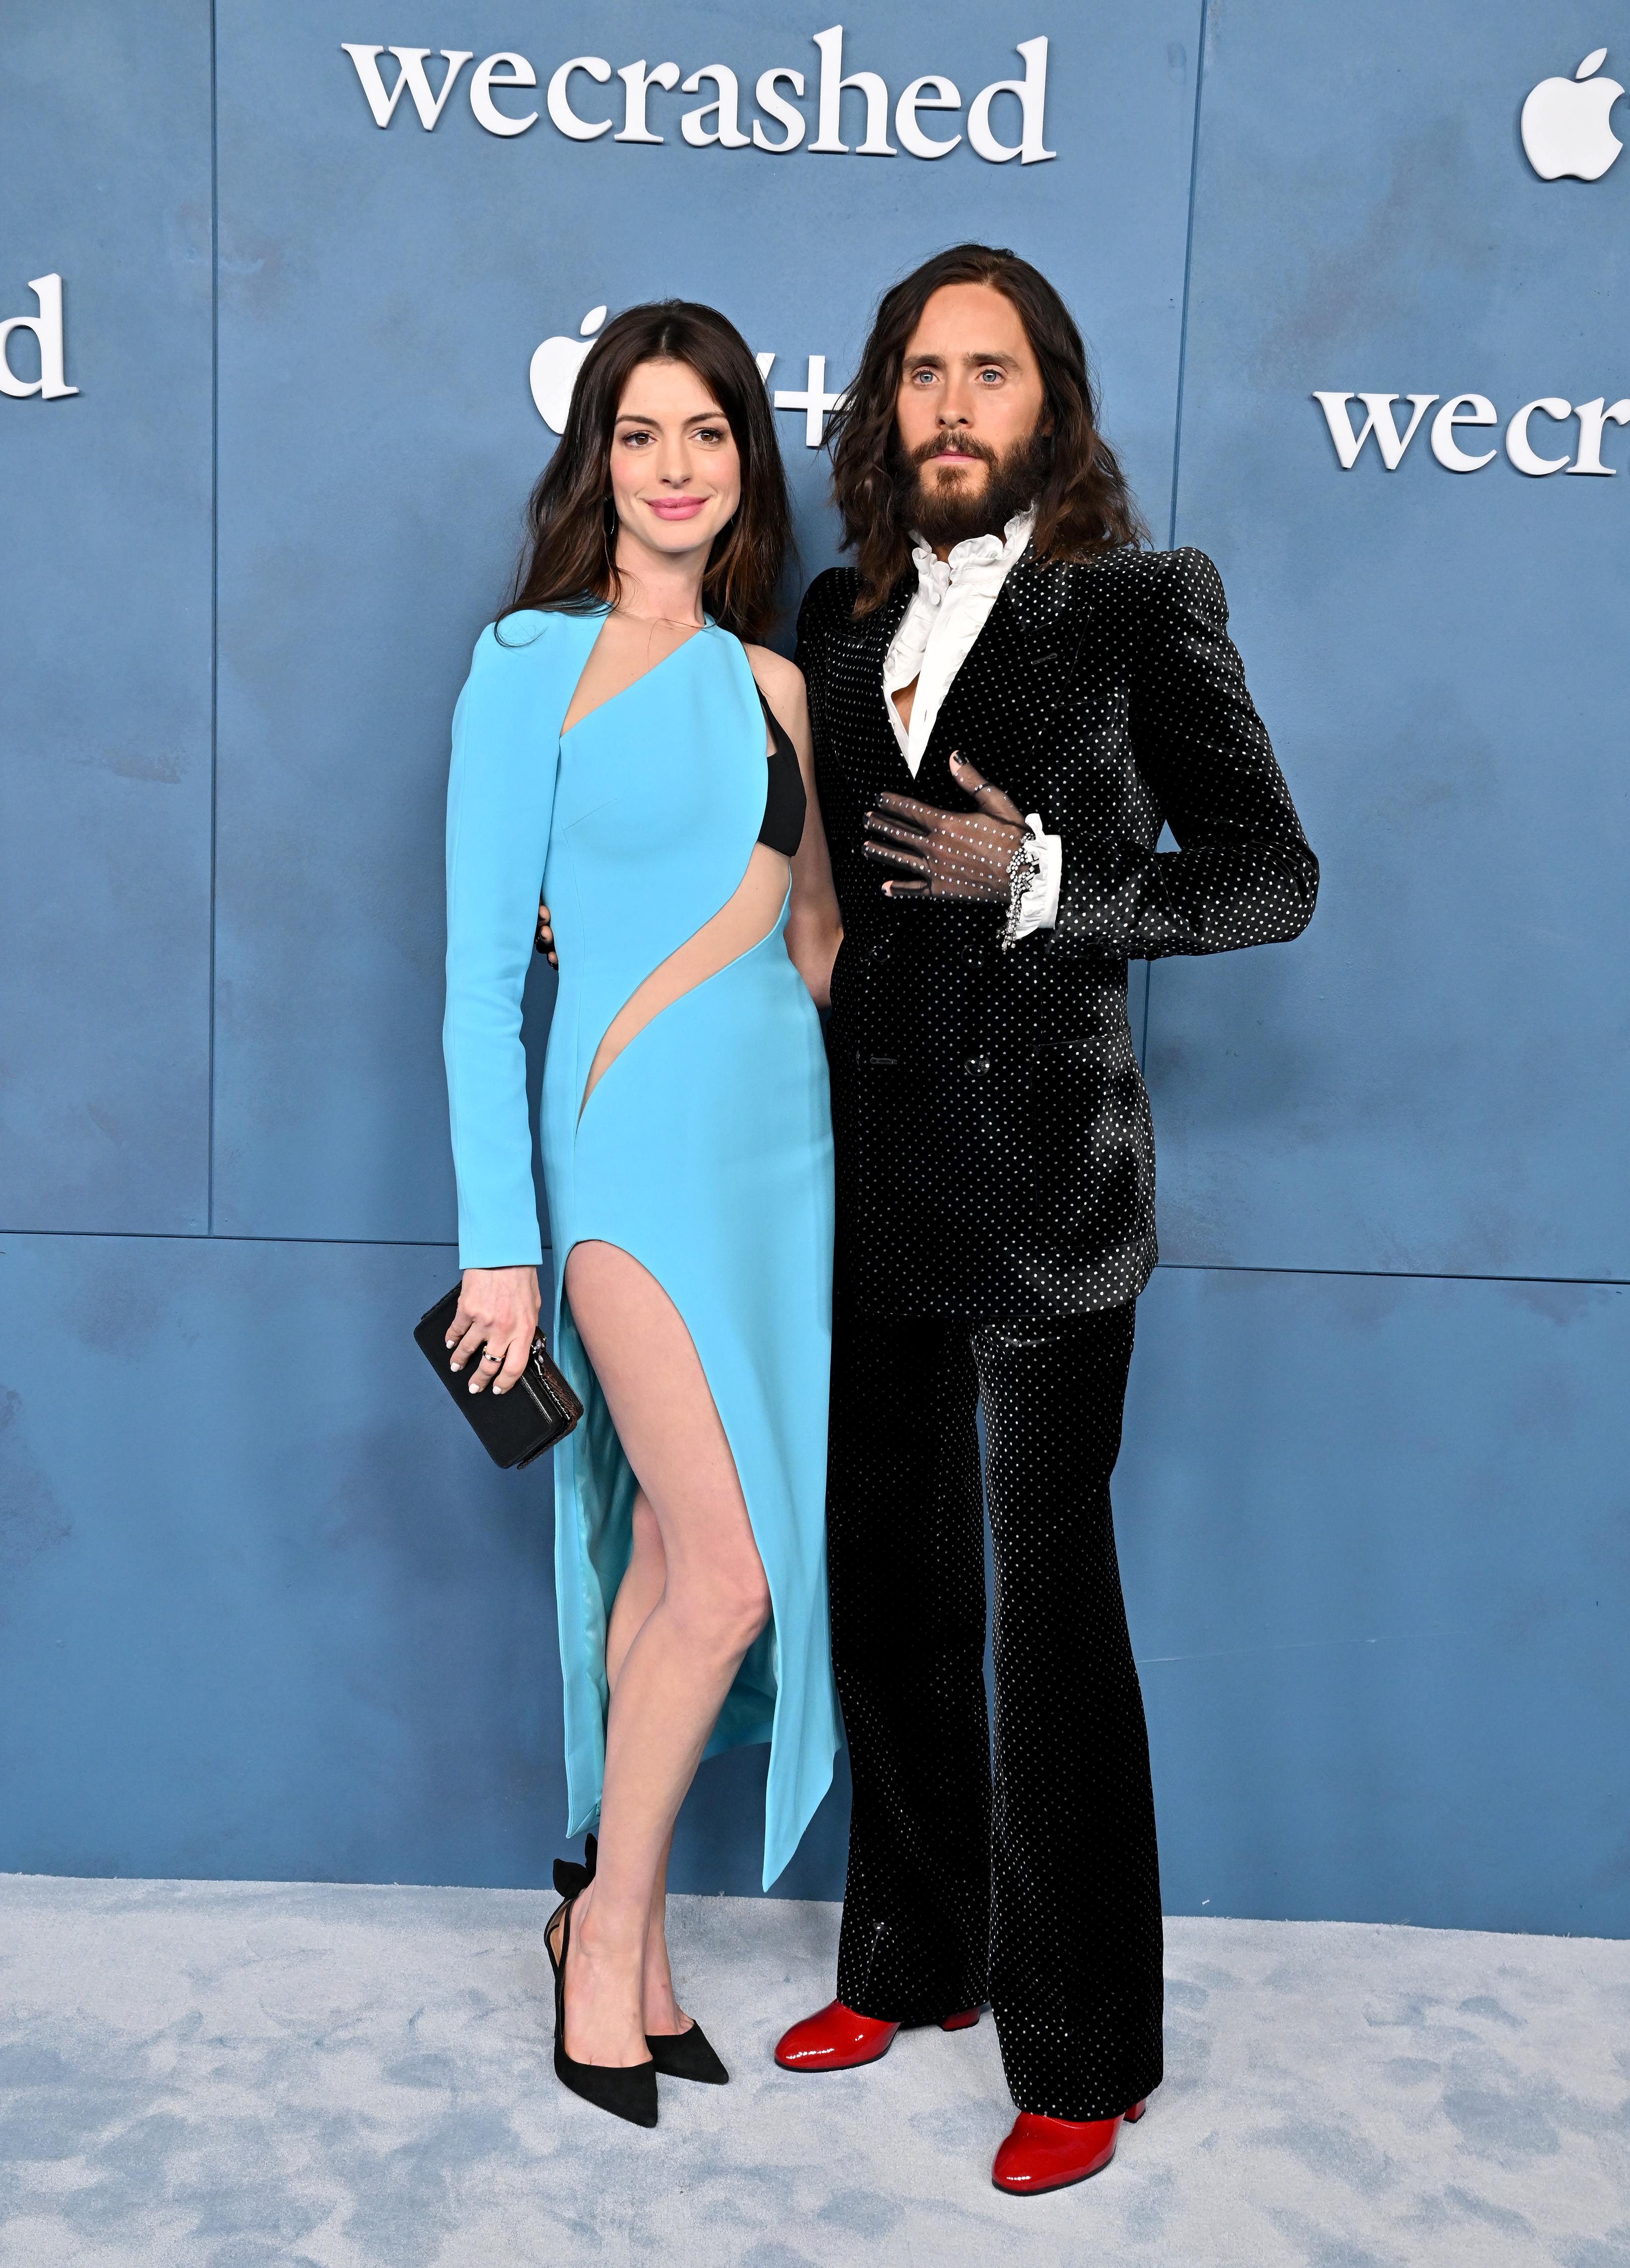 LOS ANGELES, CALIFORNIA - MARCH 17: Anne Hathaway and Jared Leto attend the Global Premiere of Apple TV+'s "WeCrashed" at Academy Museum of Motion Pictures on March 17, 2022 in Los Angeles, California. (Photo by Axelle/Bauer-Griffin/FilmMagic) (Foto: FilmMagic)